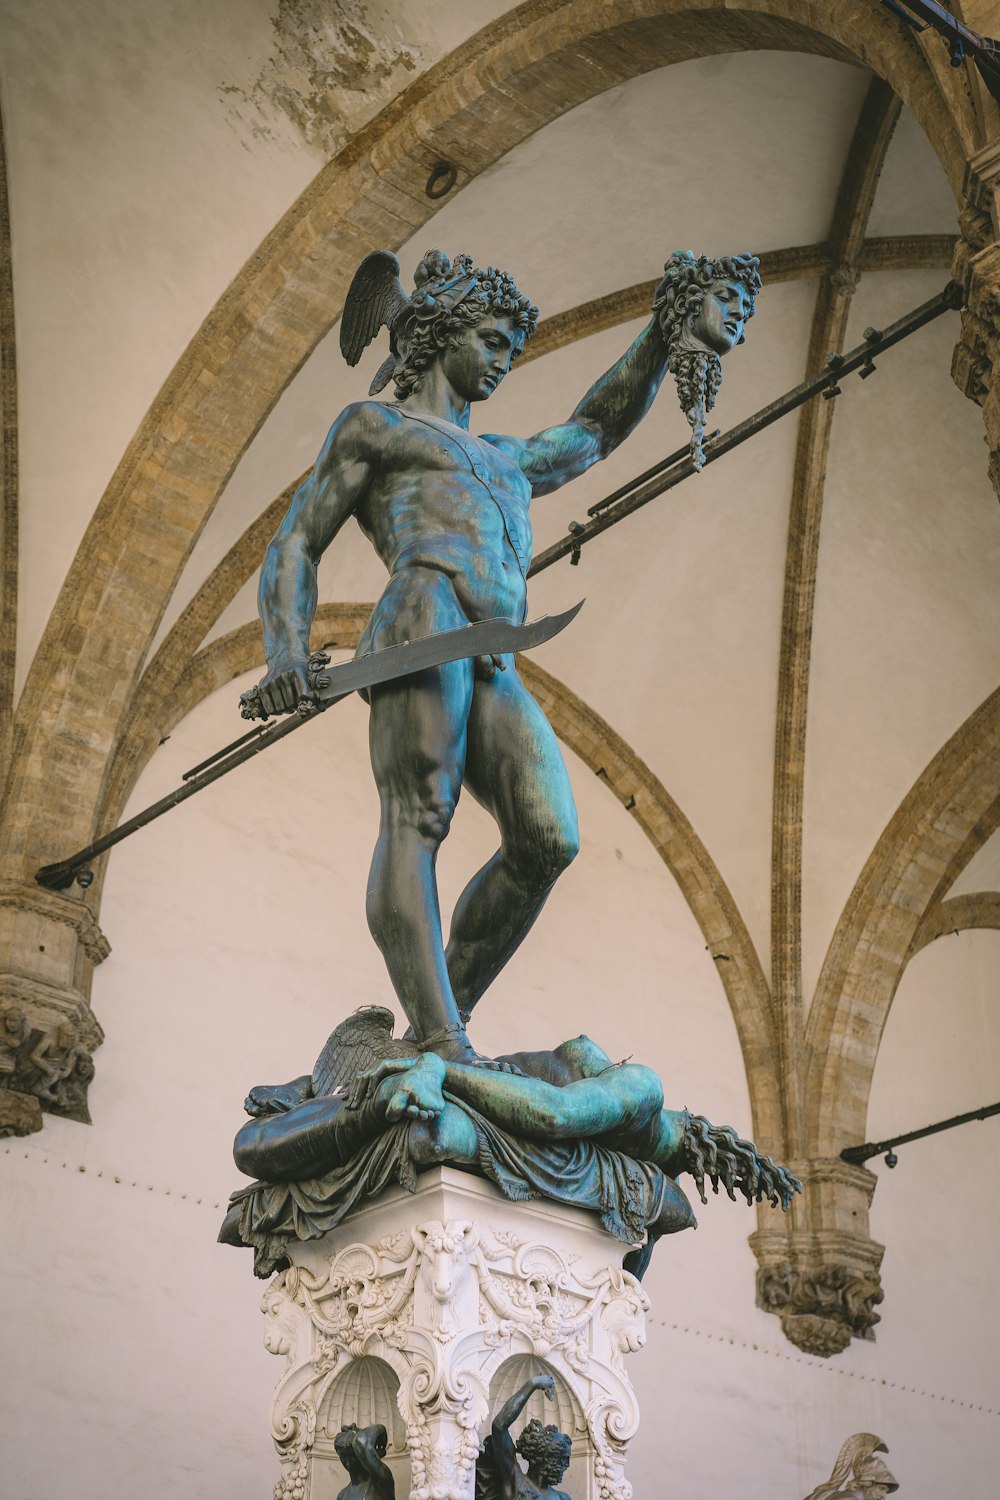 a statue of a person holding a sword